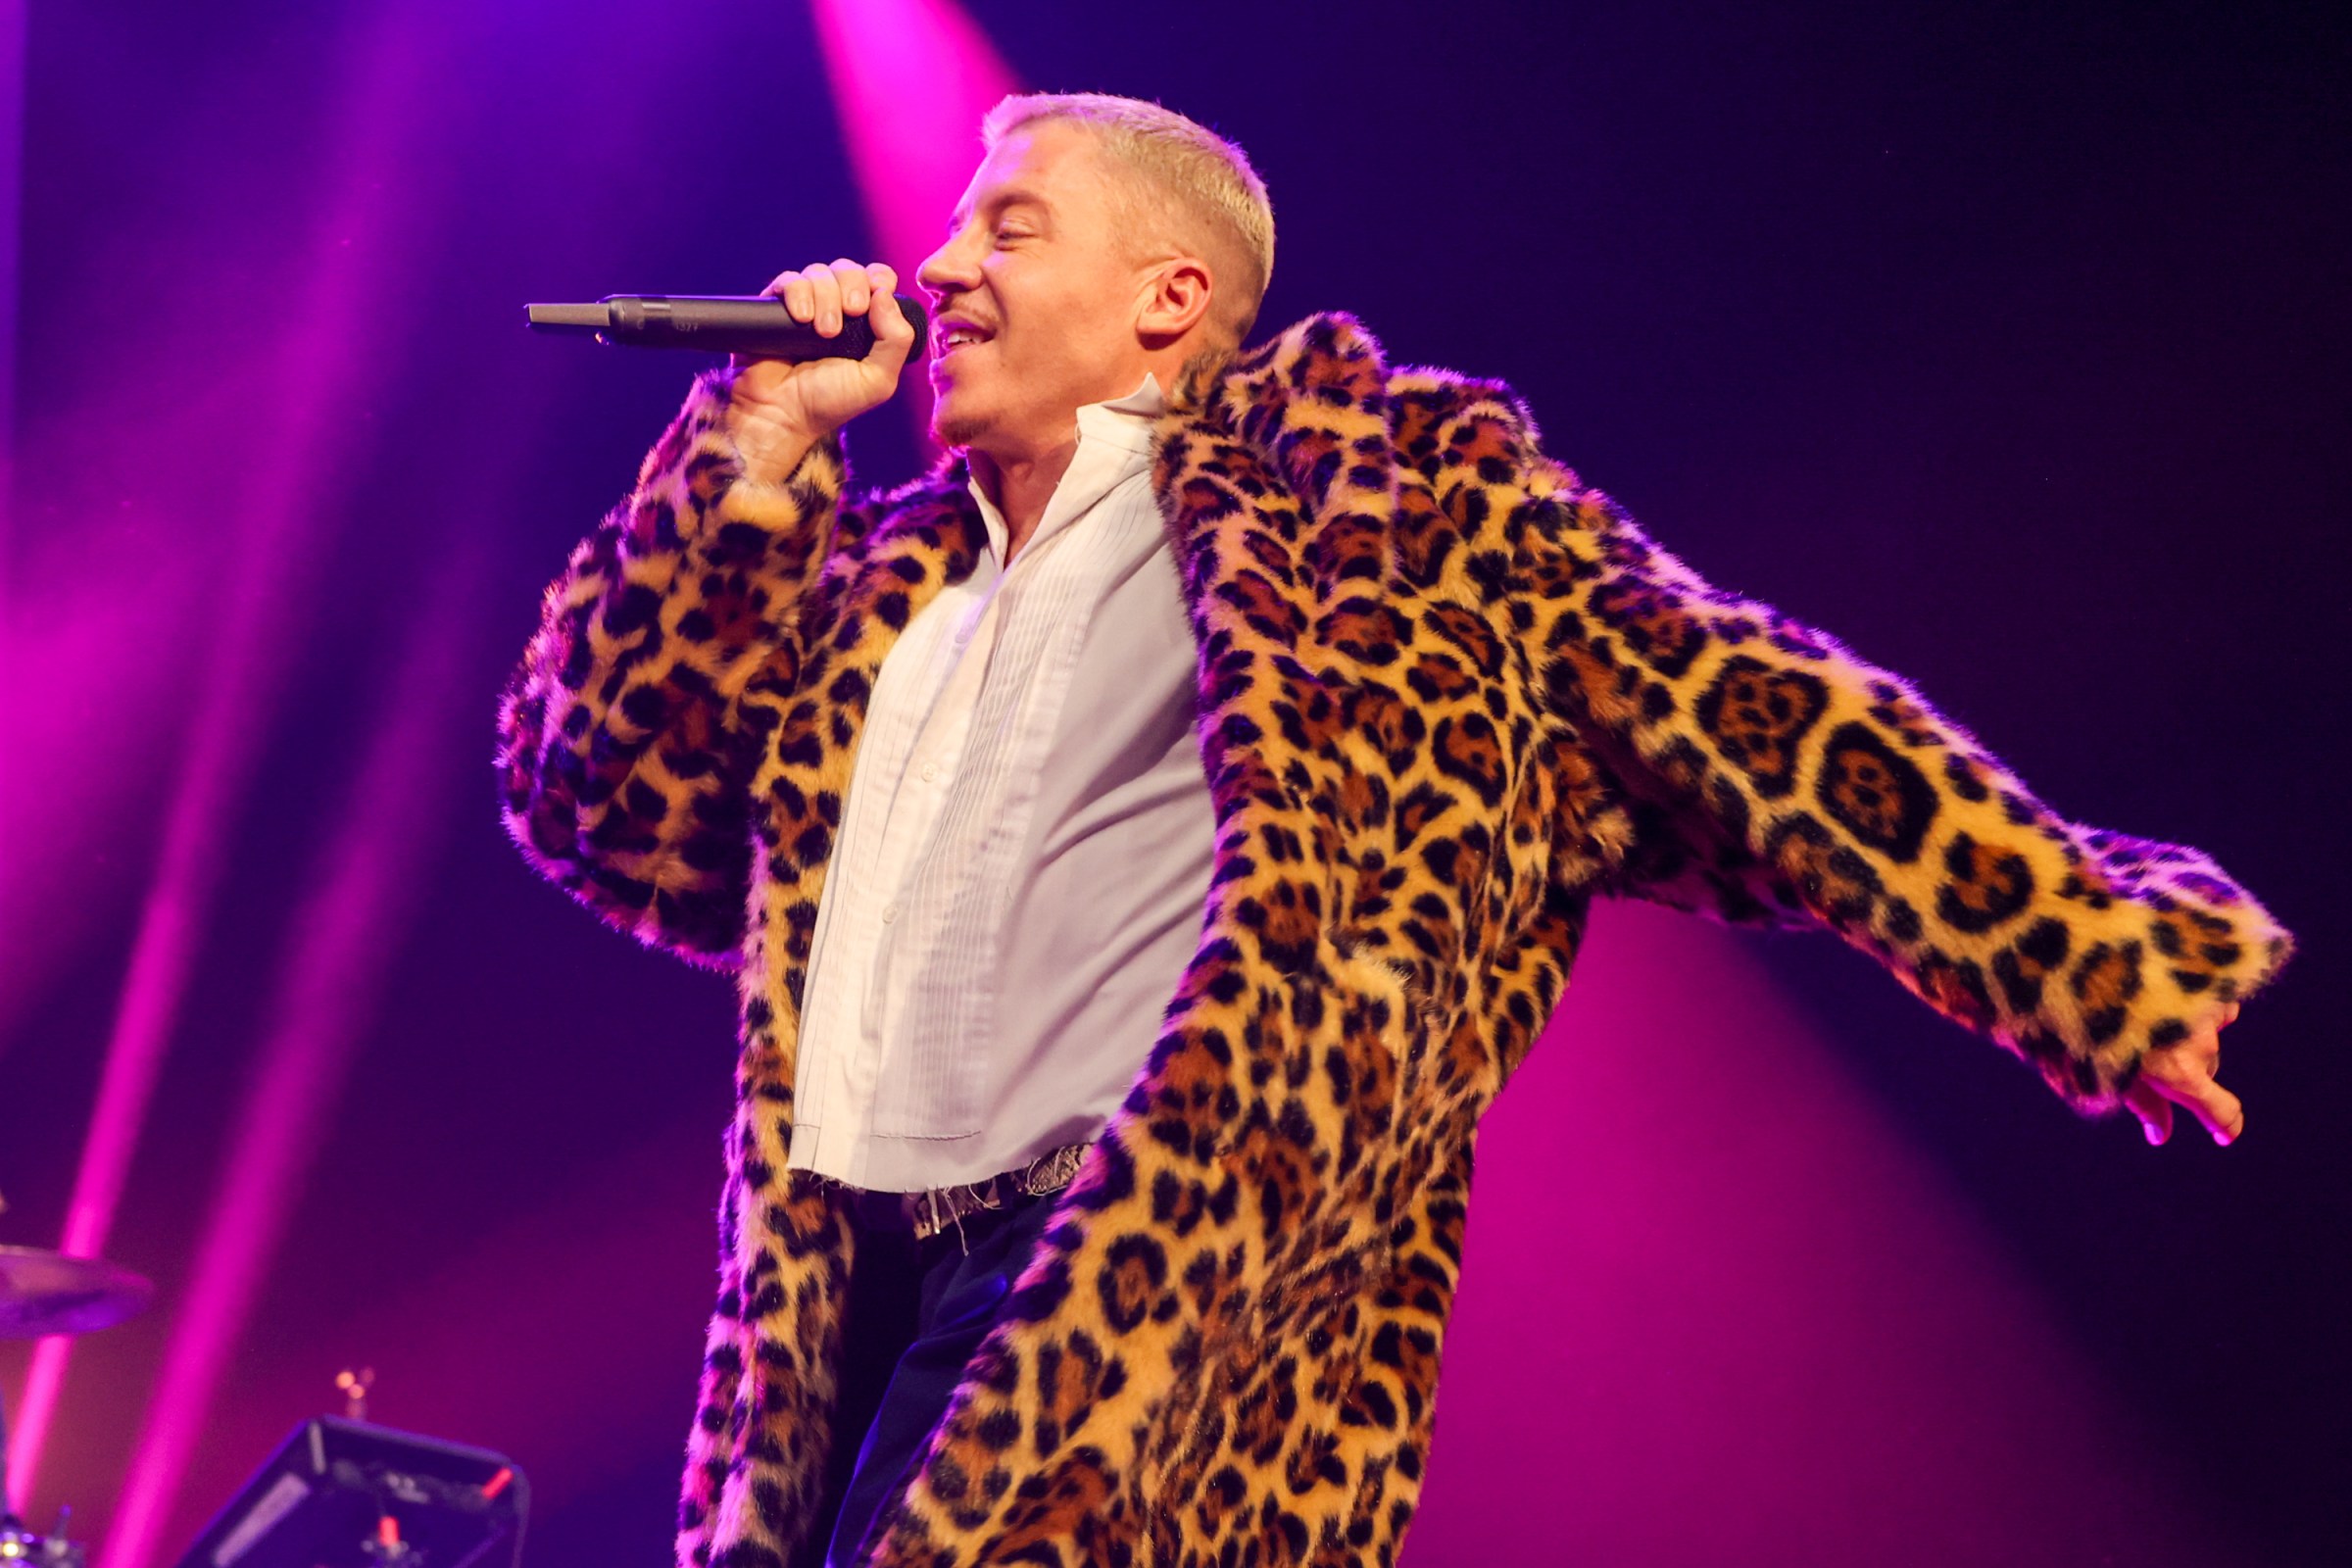 Macklemore, wearing a leopard print coat and lit by purple and pink stage lights, sings into a handheld microphone.